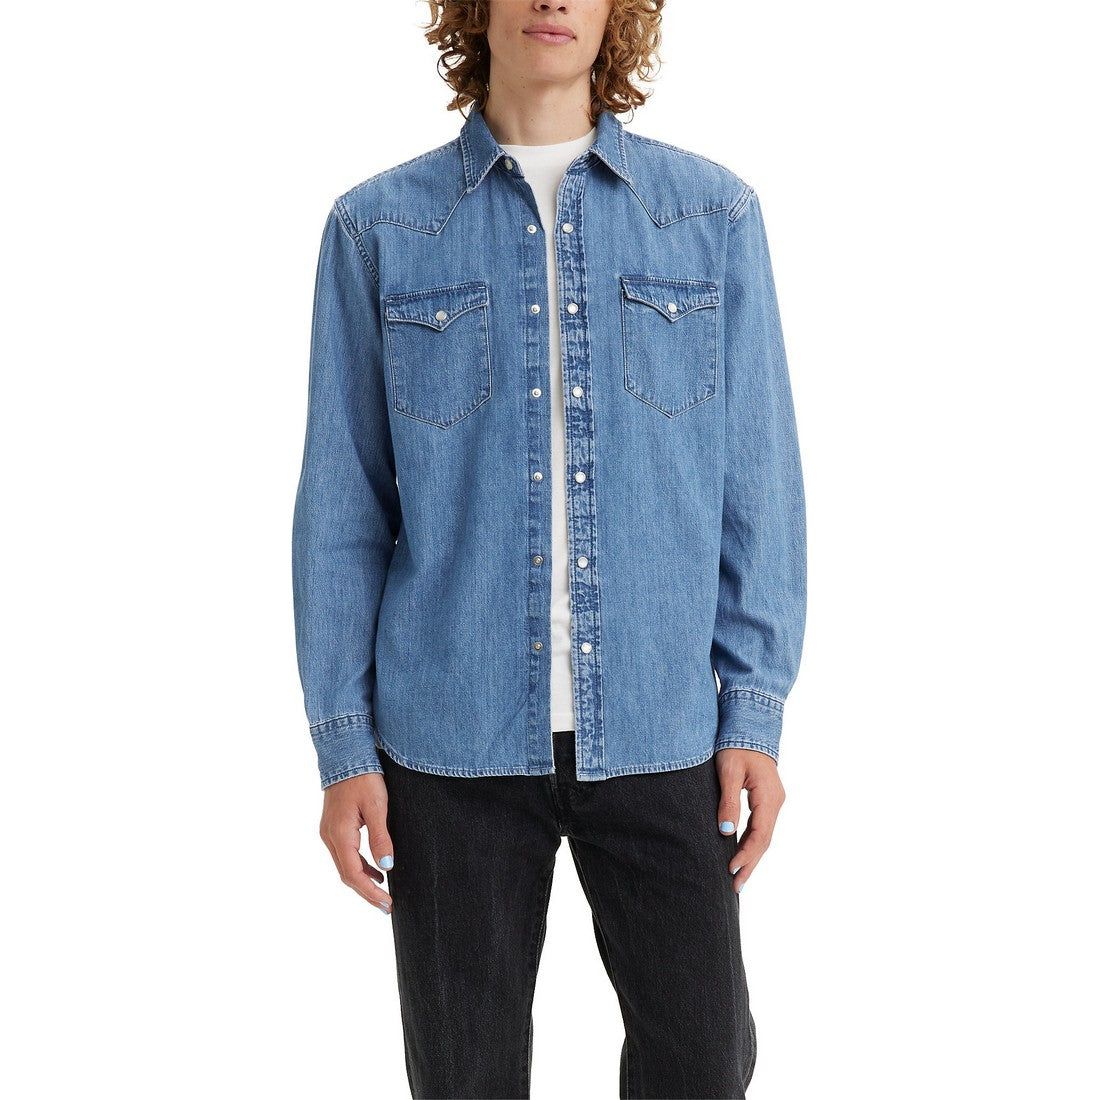 Levi's - Classic Western Shirt in Franklin Stone